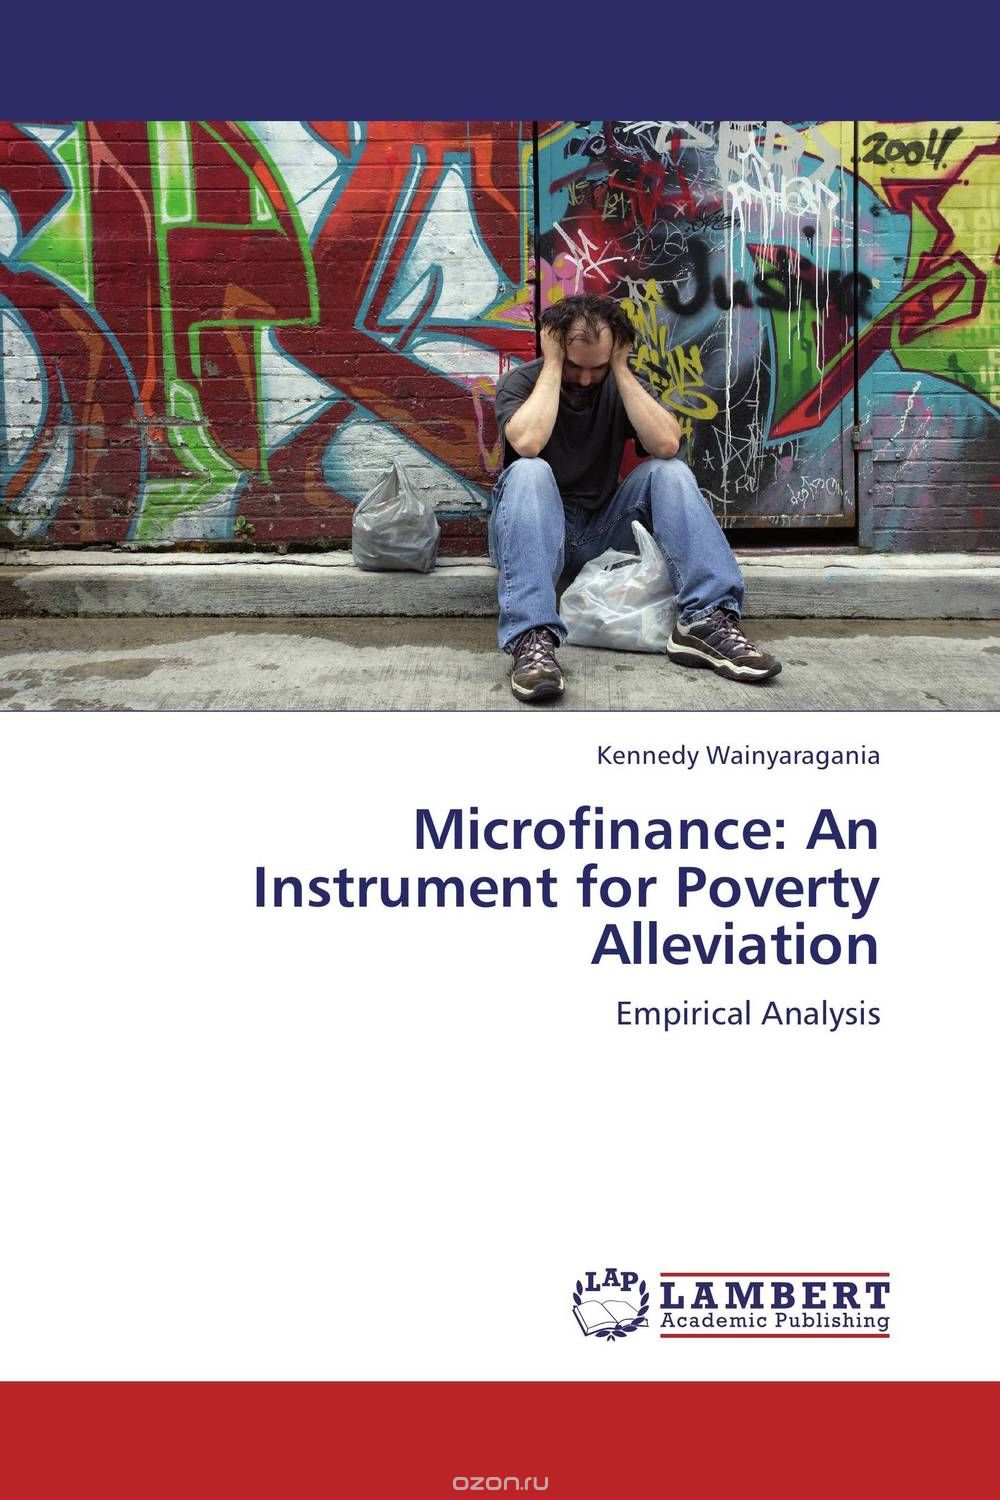 Microfinance: An Instrument for Poverty Alleviation